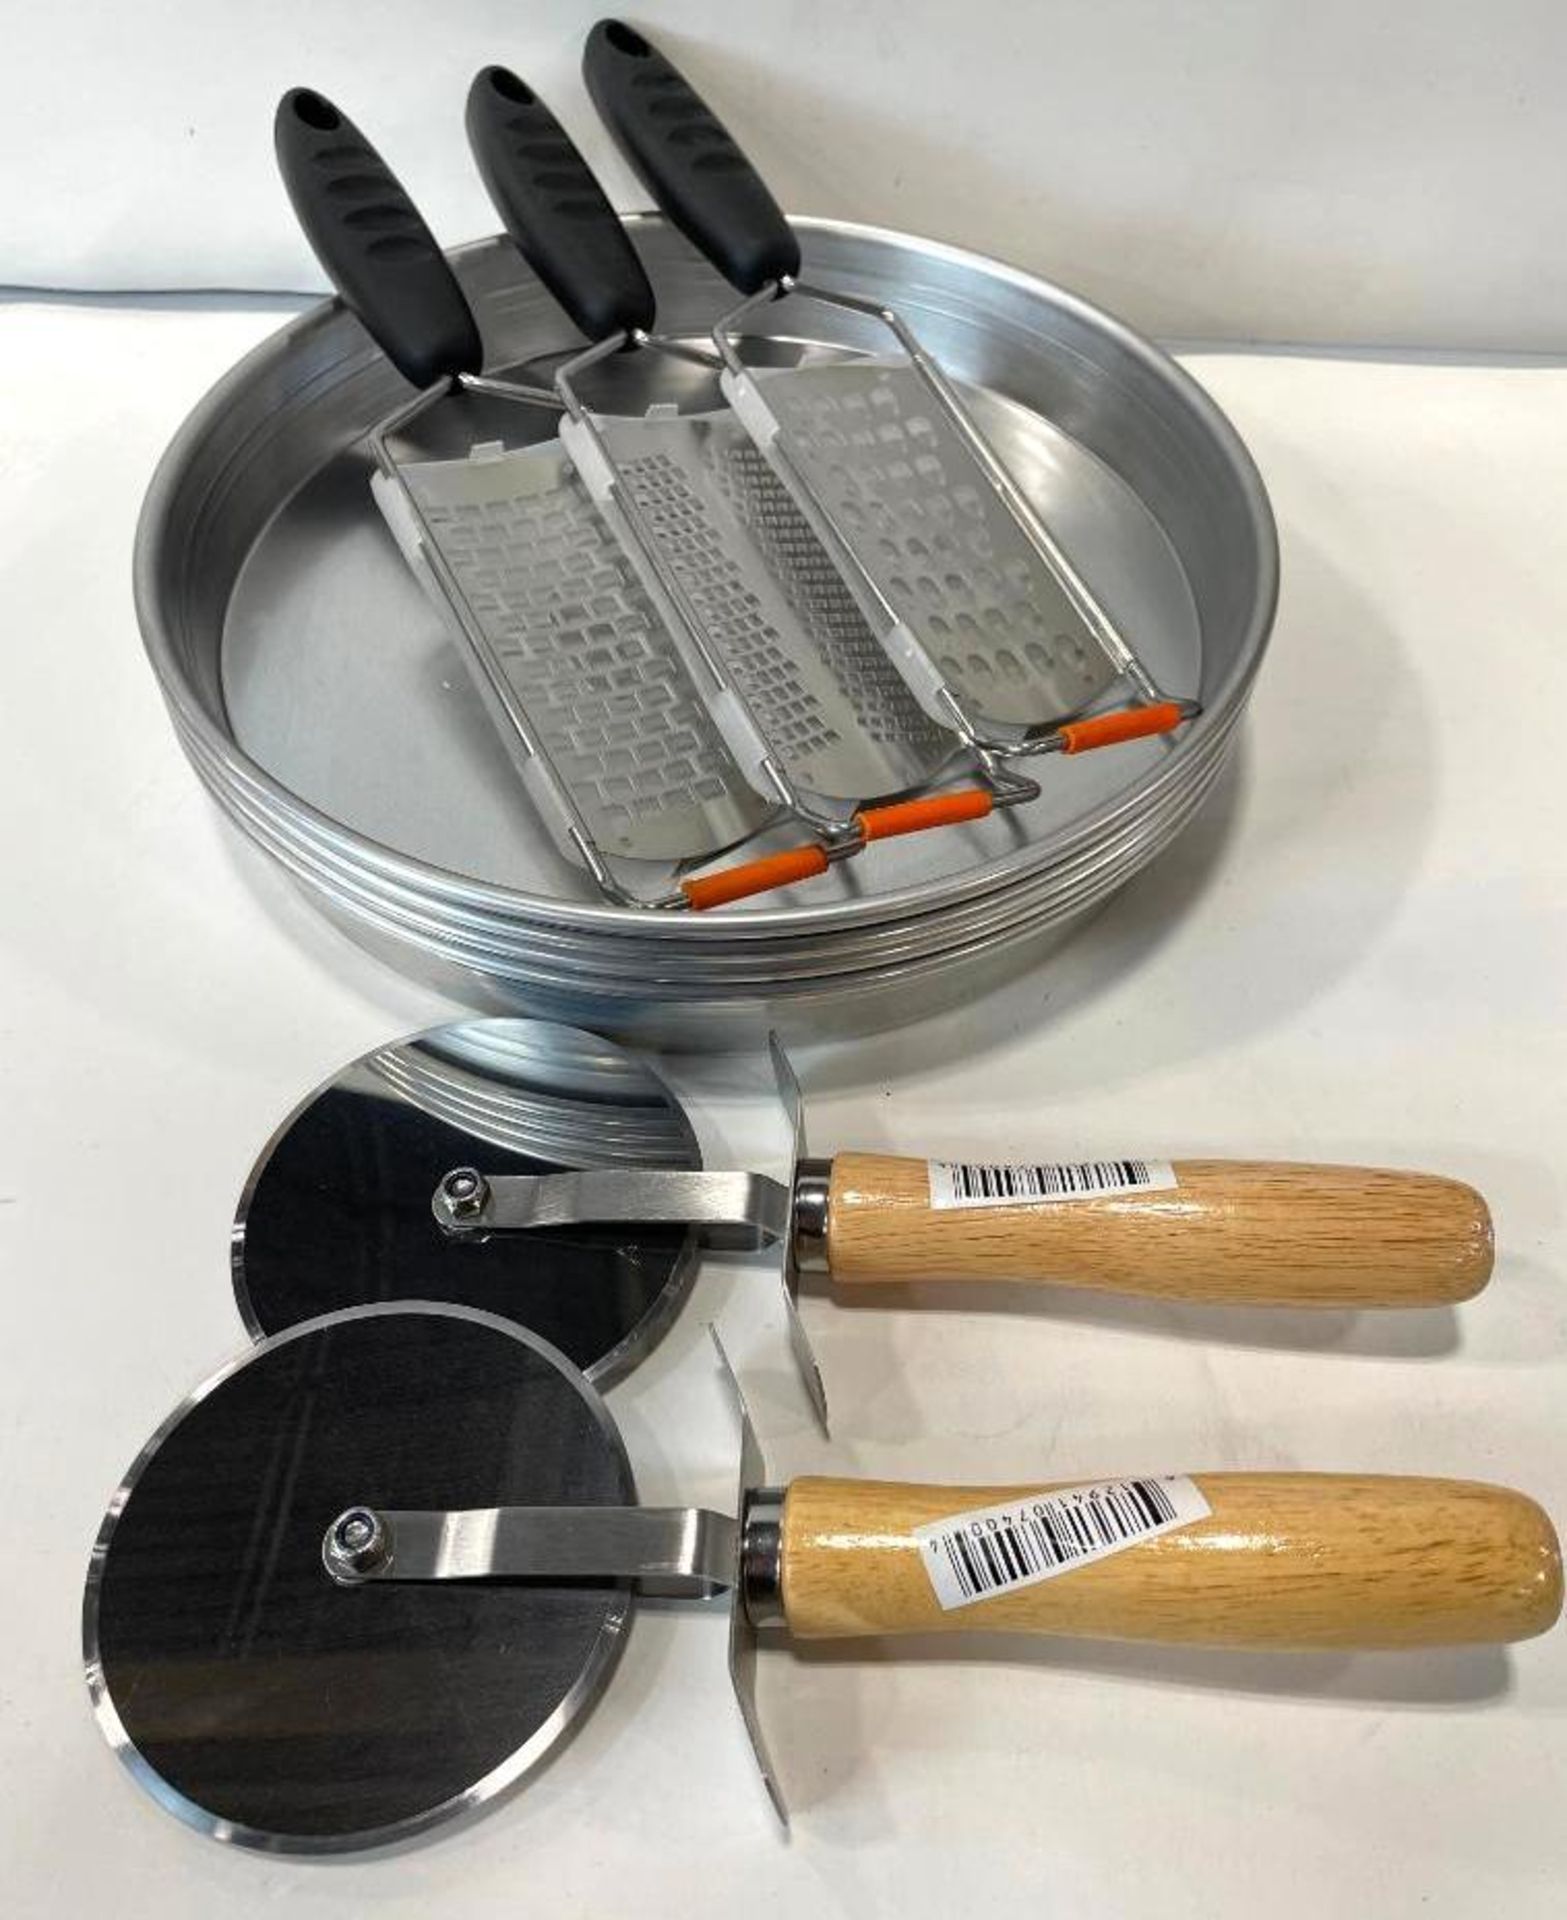 11" PIZZA PAN SET INCLUDING: (4) 15" PIZZA PANS, (2) PIZZA CUTTERS & (3) GRATERS